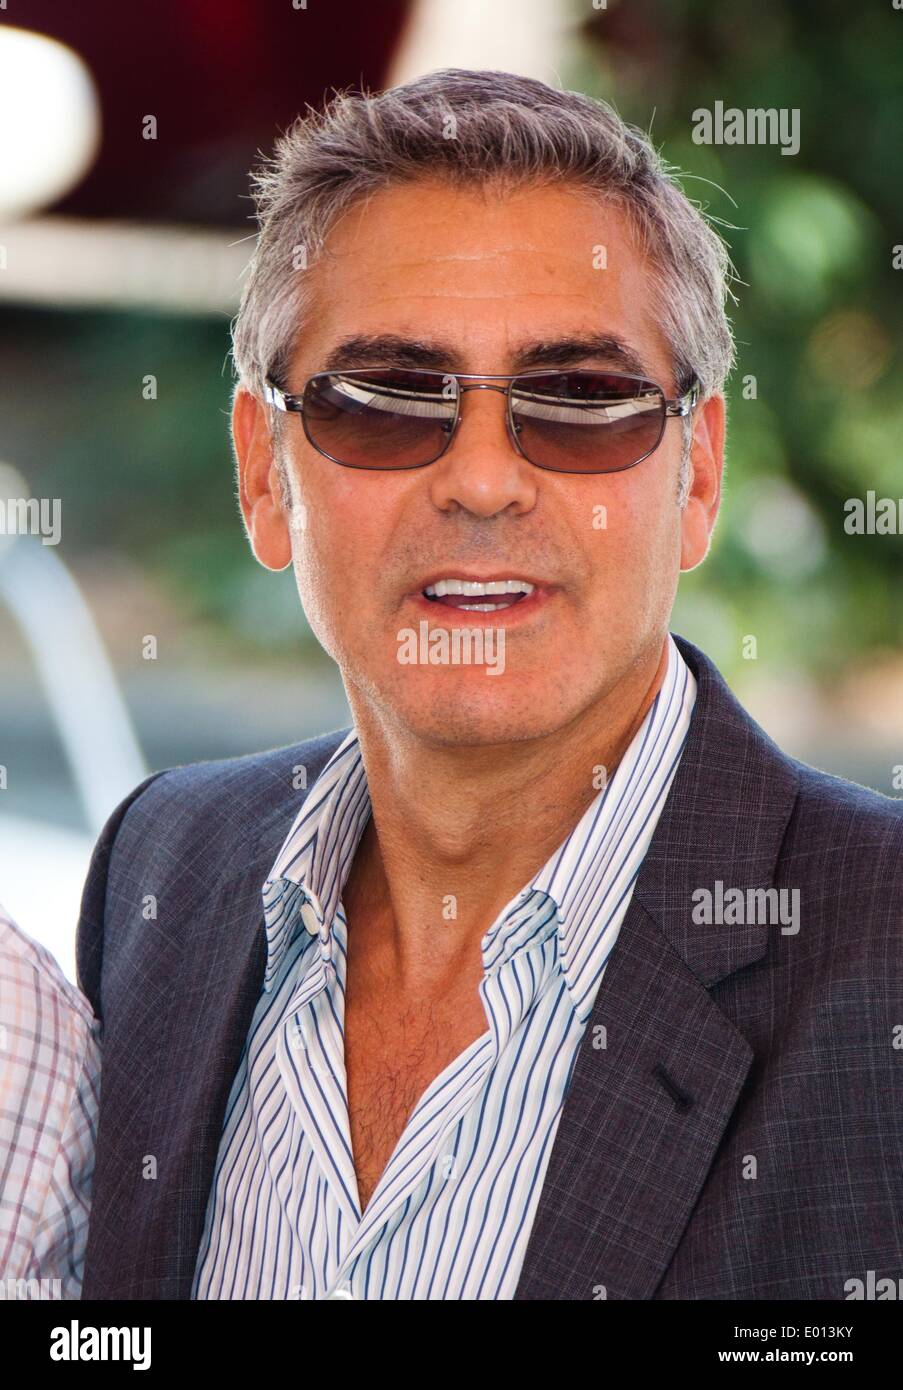 US actor/director George Clooney arrives for the press conference of 'The Ides Of March' during the 68th Venice International Film Festival, Mostra Internationale d'Arte Cinematografica, at Palazzo del Casino in Venice, Italy, on 31 August 2011. Photo: Hubert Boesl Stock Photo